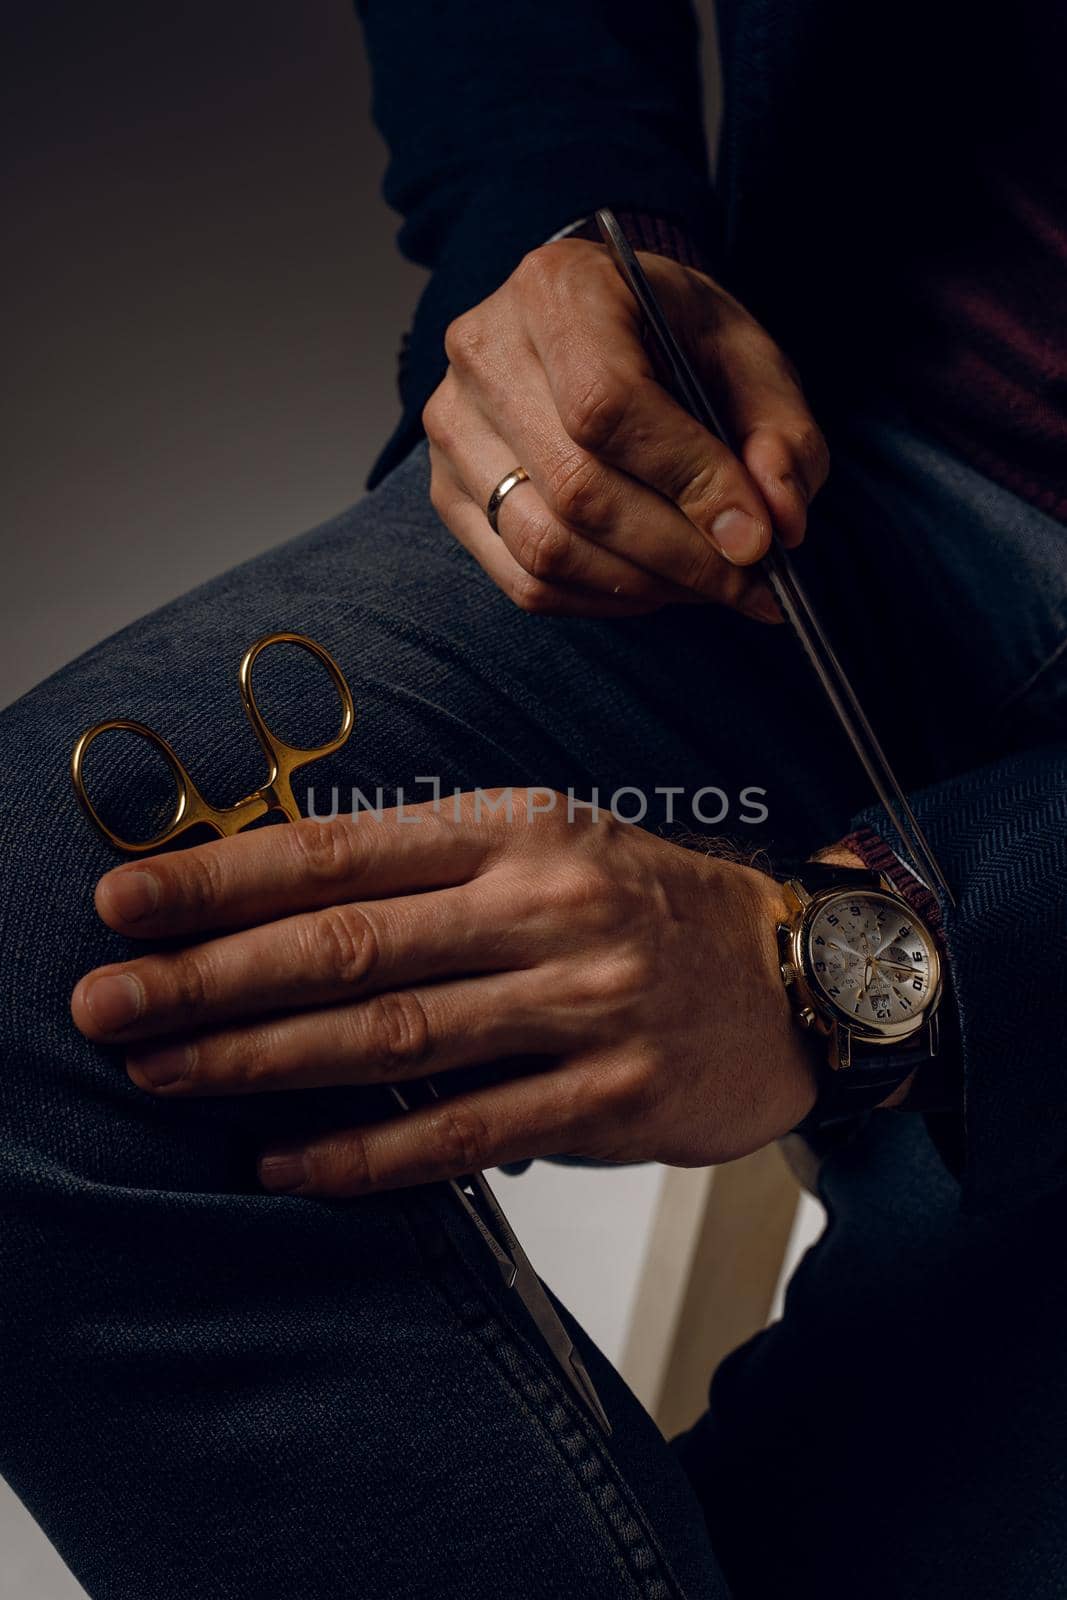 Needle holder and surgical knife and business watch close-up by Rabizo